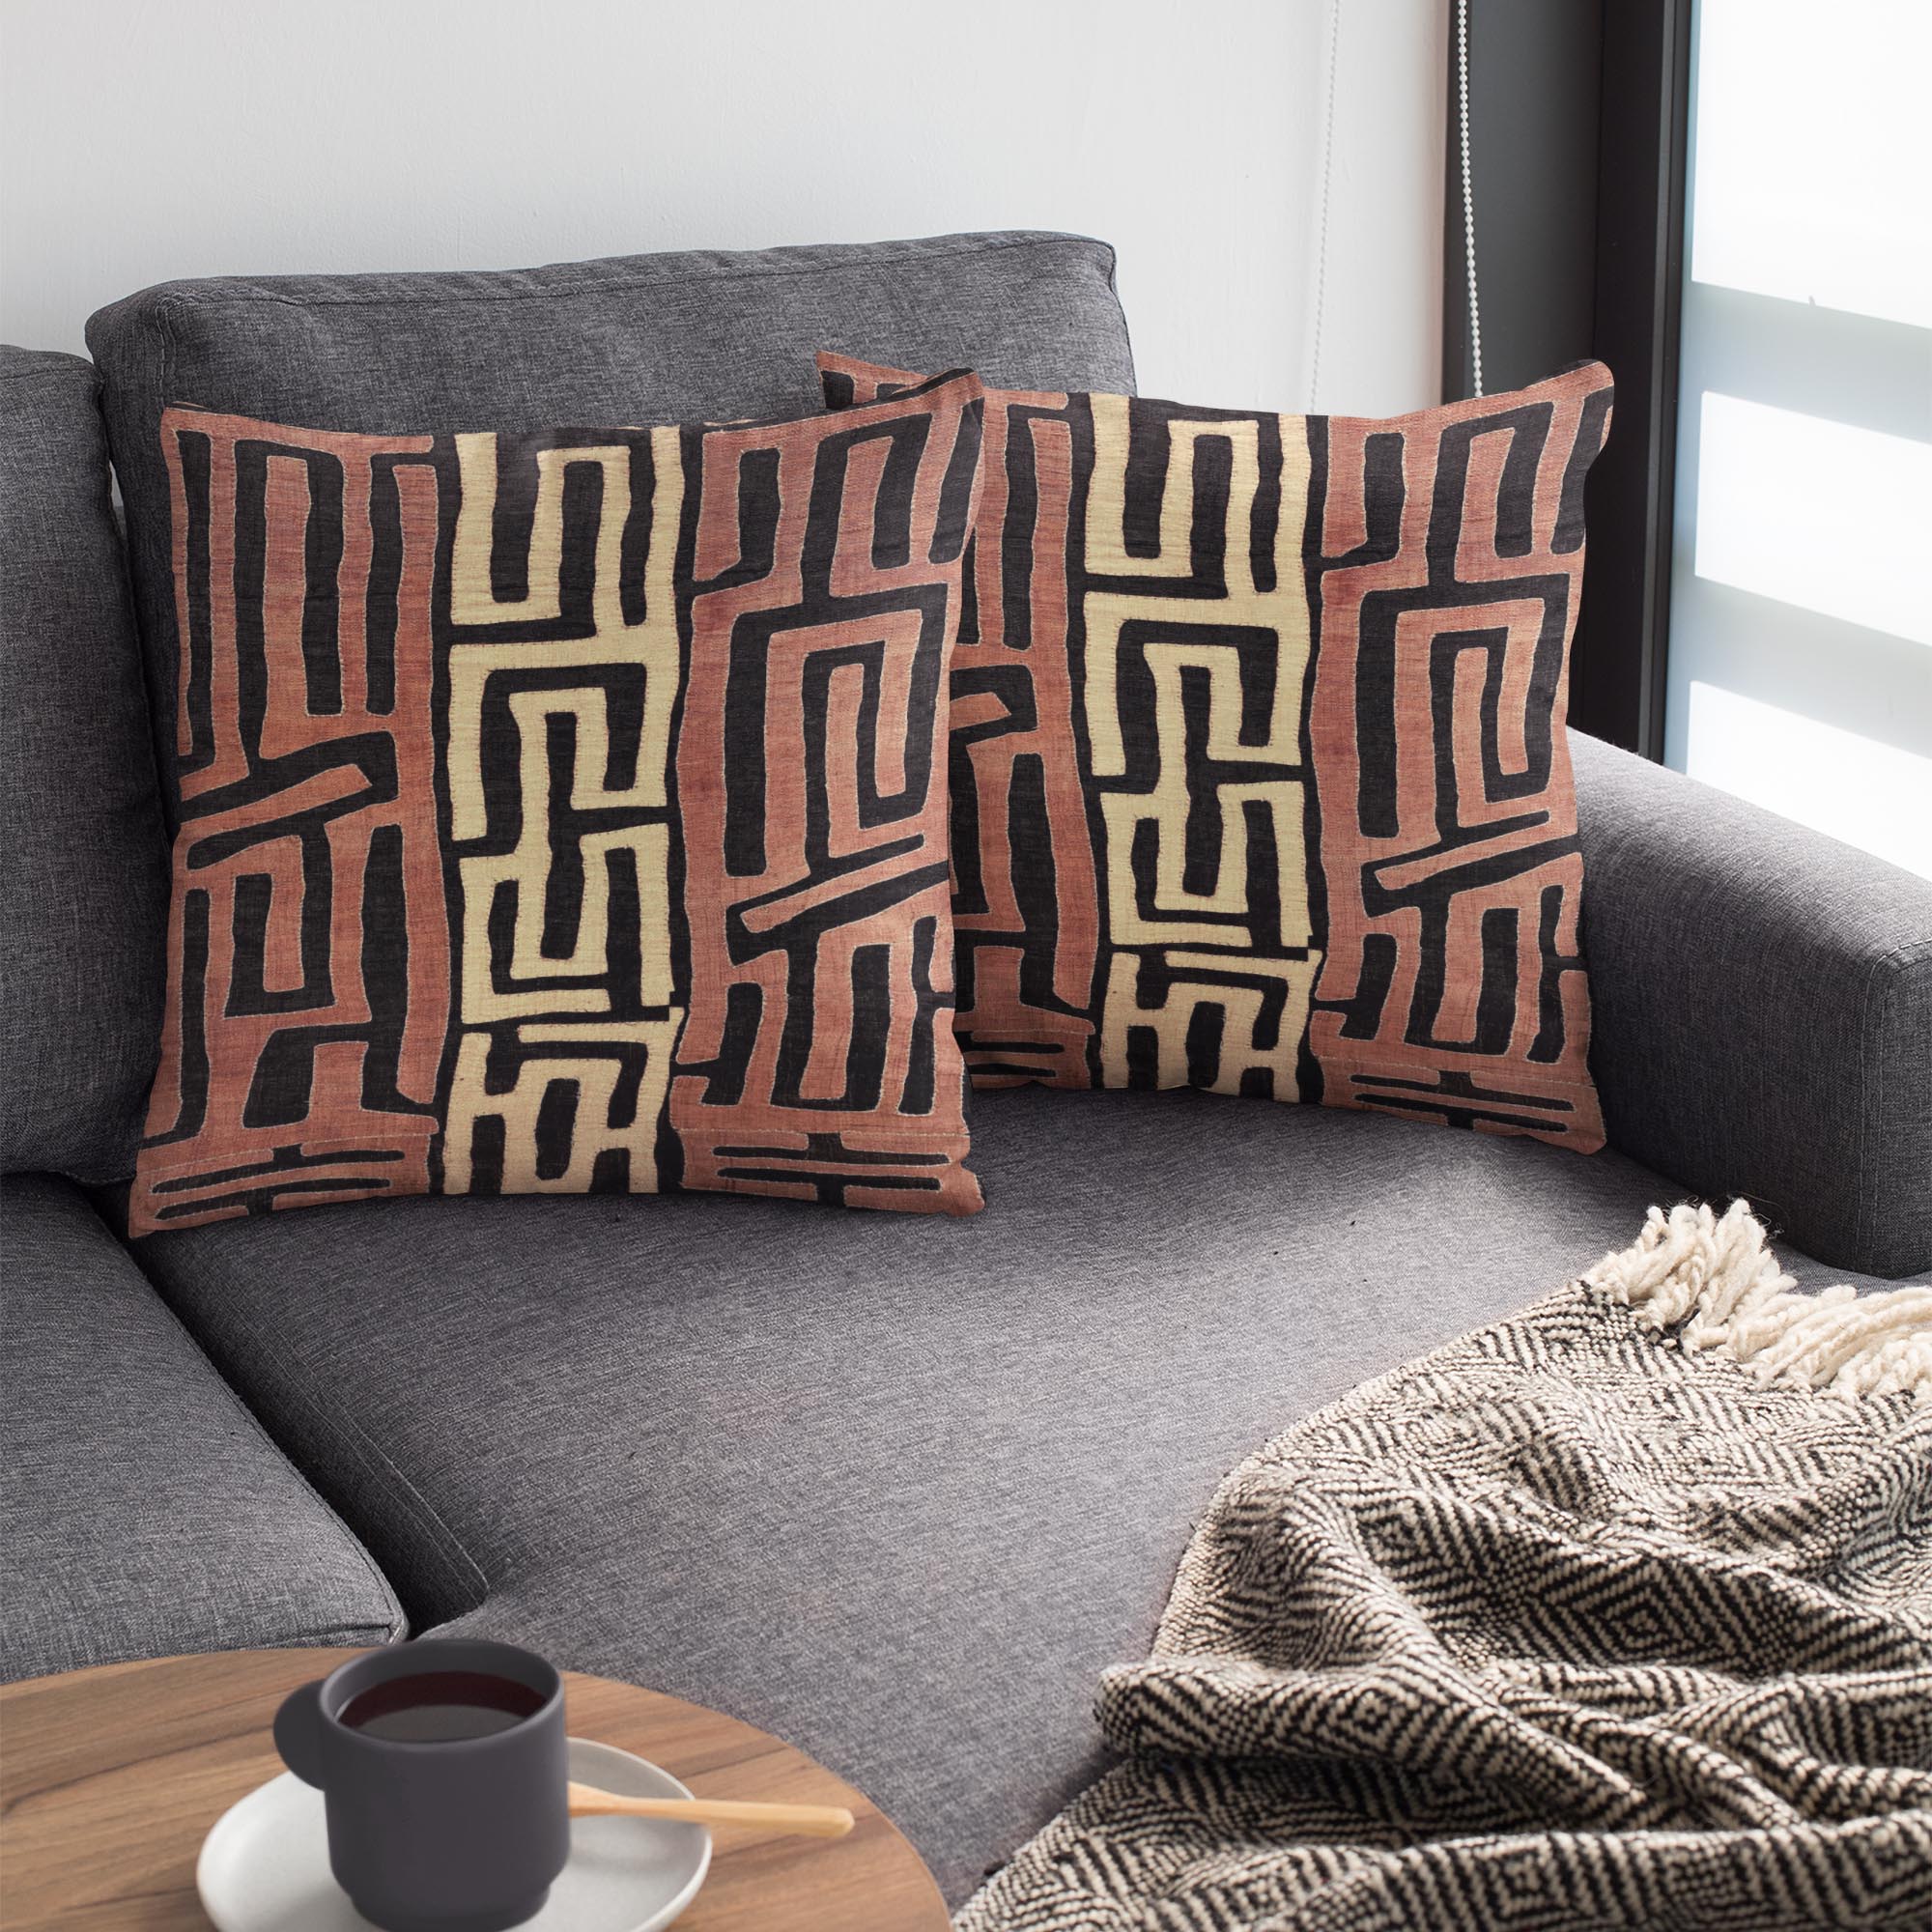 Home Decor Mudcloth, Kuba Cloth African Tribal Pillow | Vintage Ethnic Afrocentric | Abstract Mali Throw Pillow